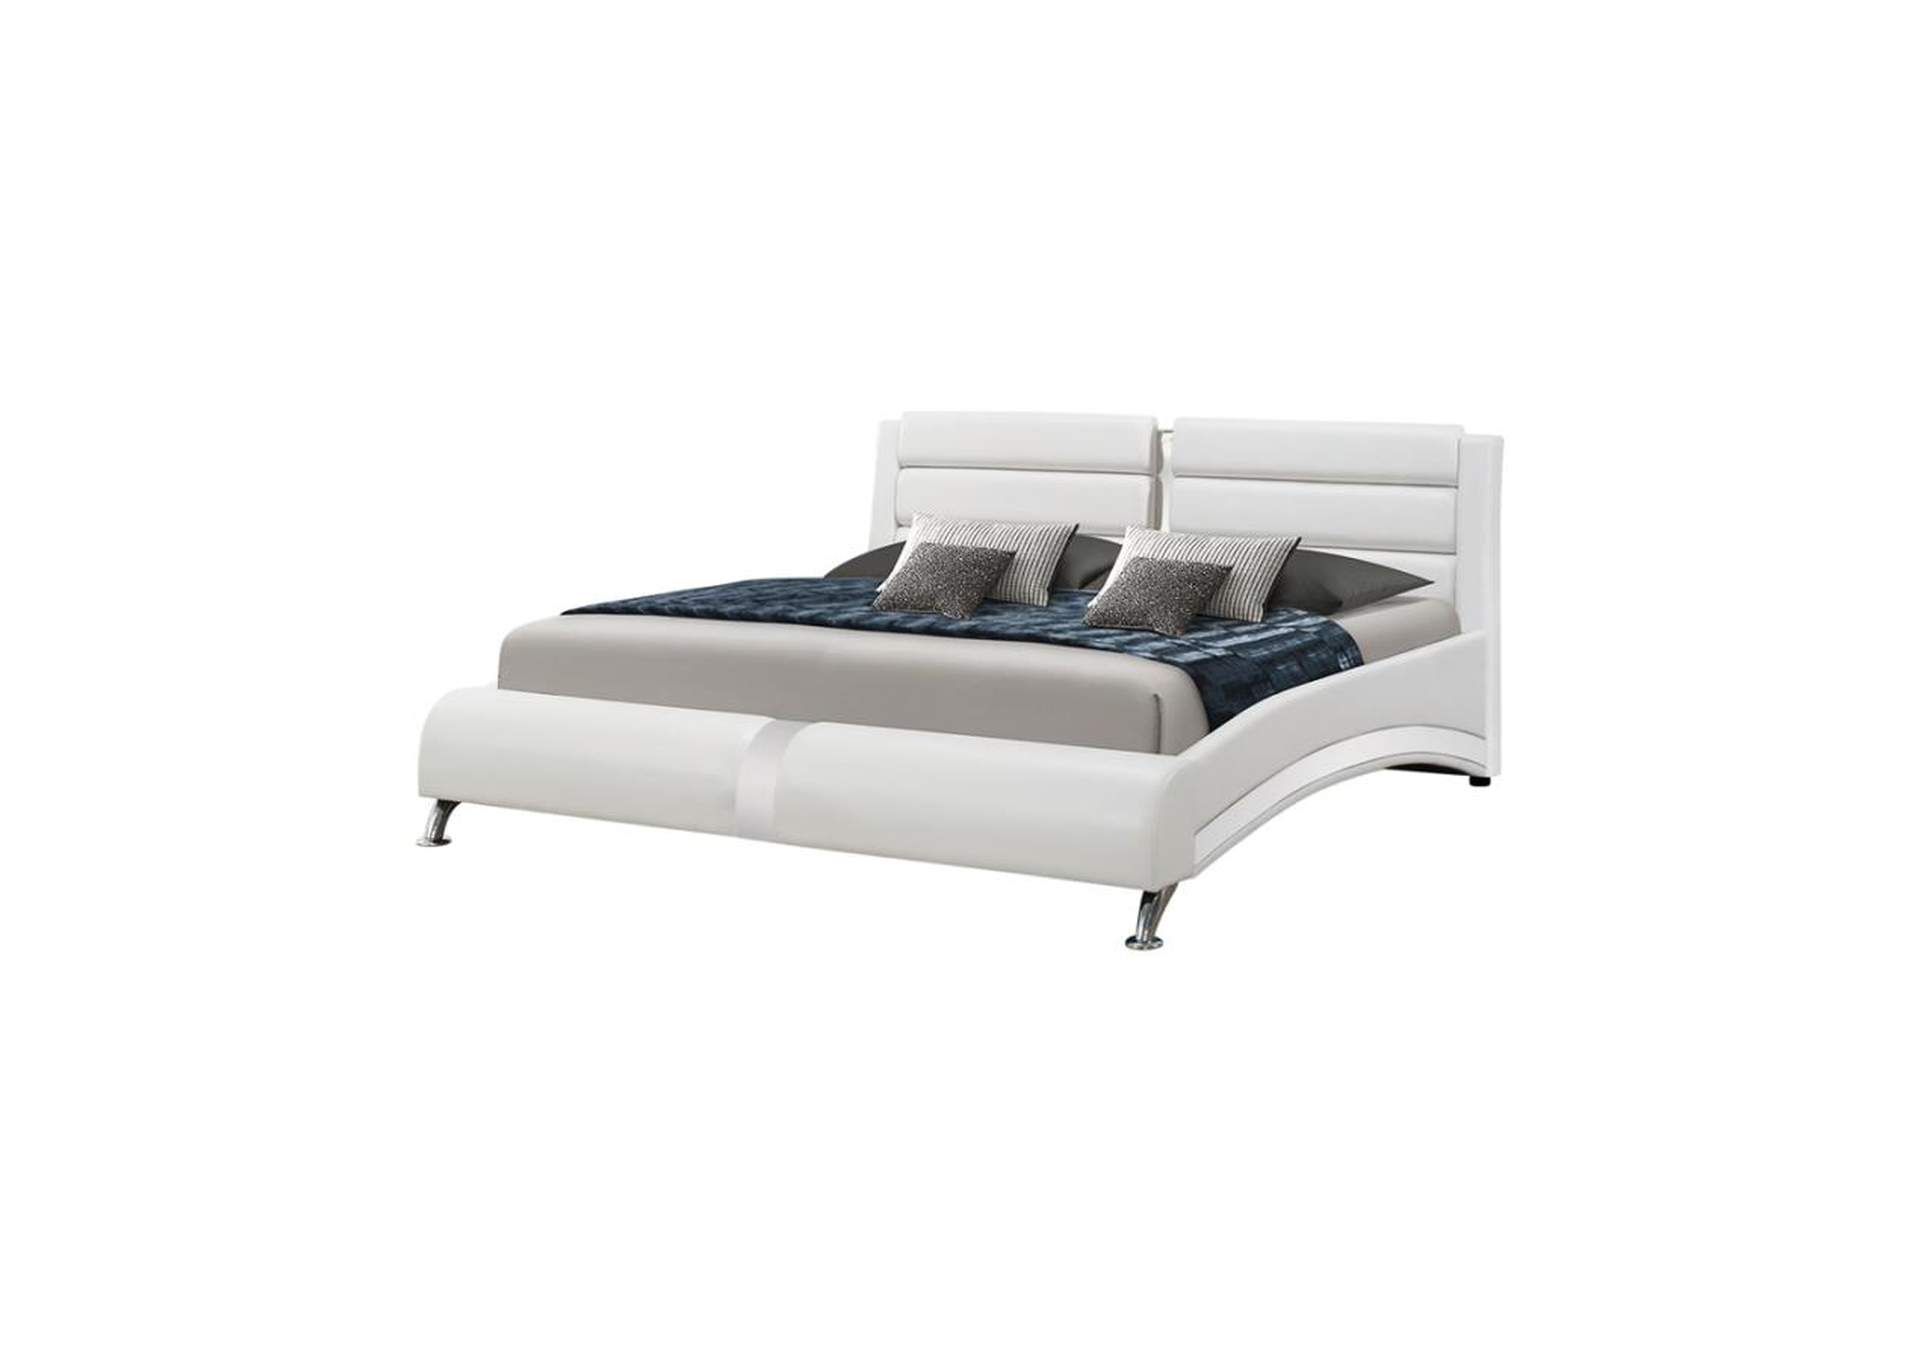 Jeremaine Queen Upholstered Bed White,Coaster Furniture